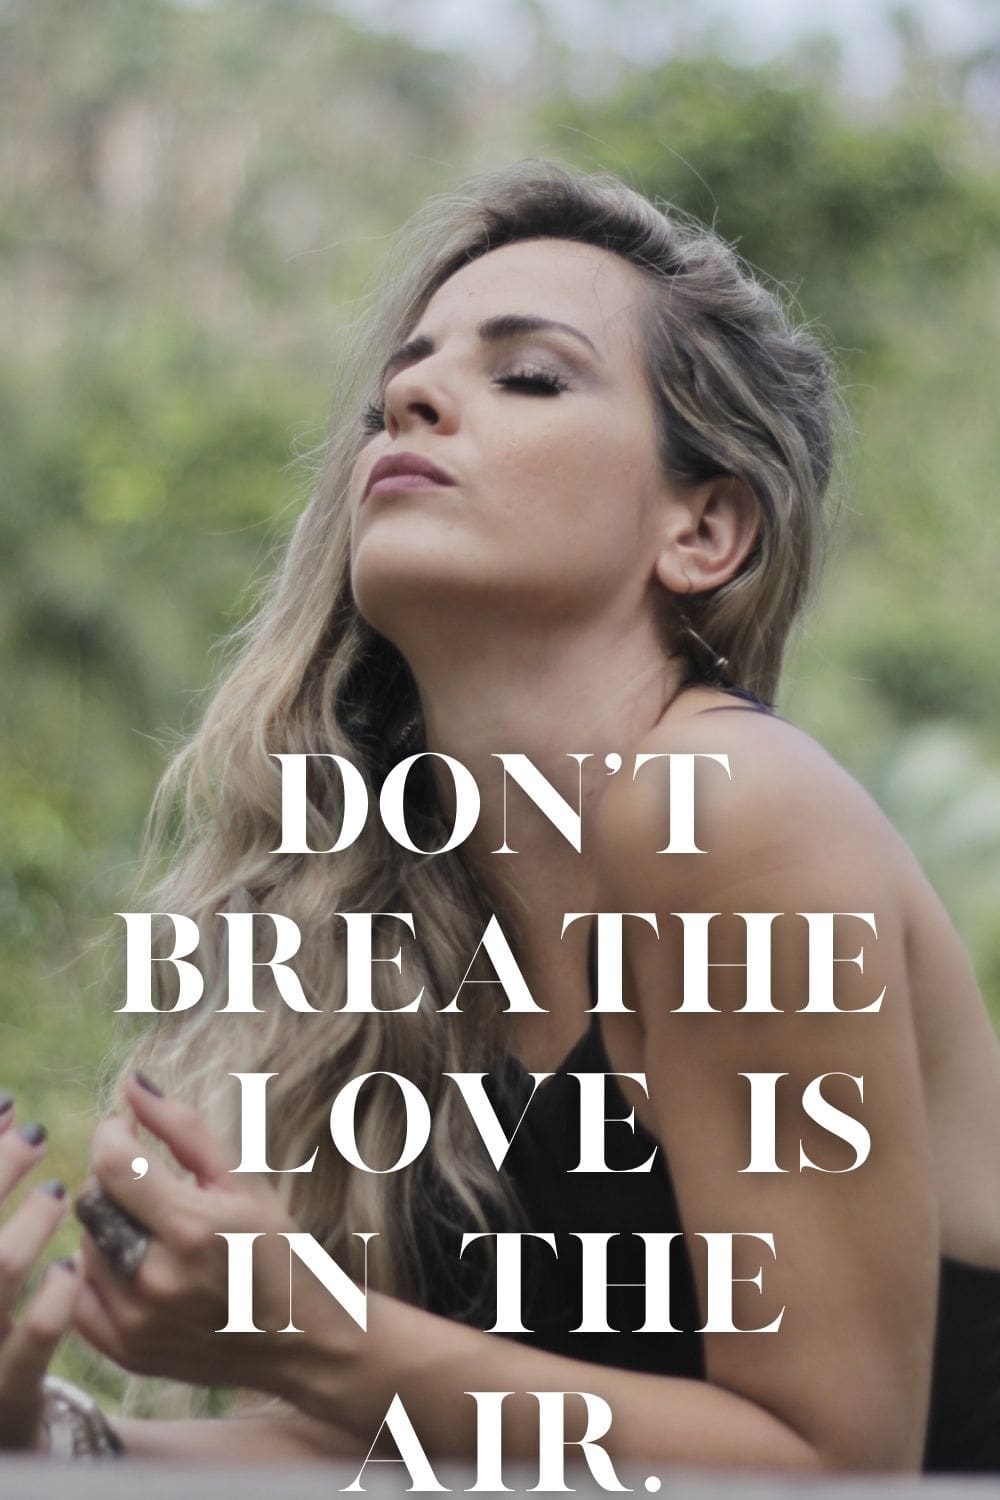 Don’t breathe, love is in the air